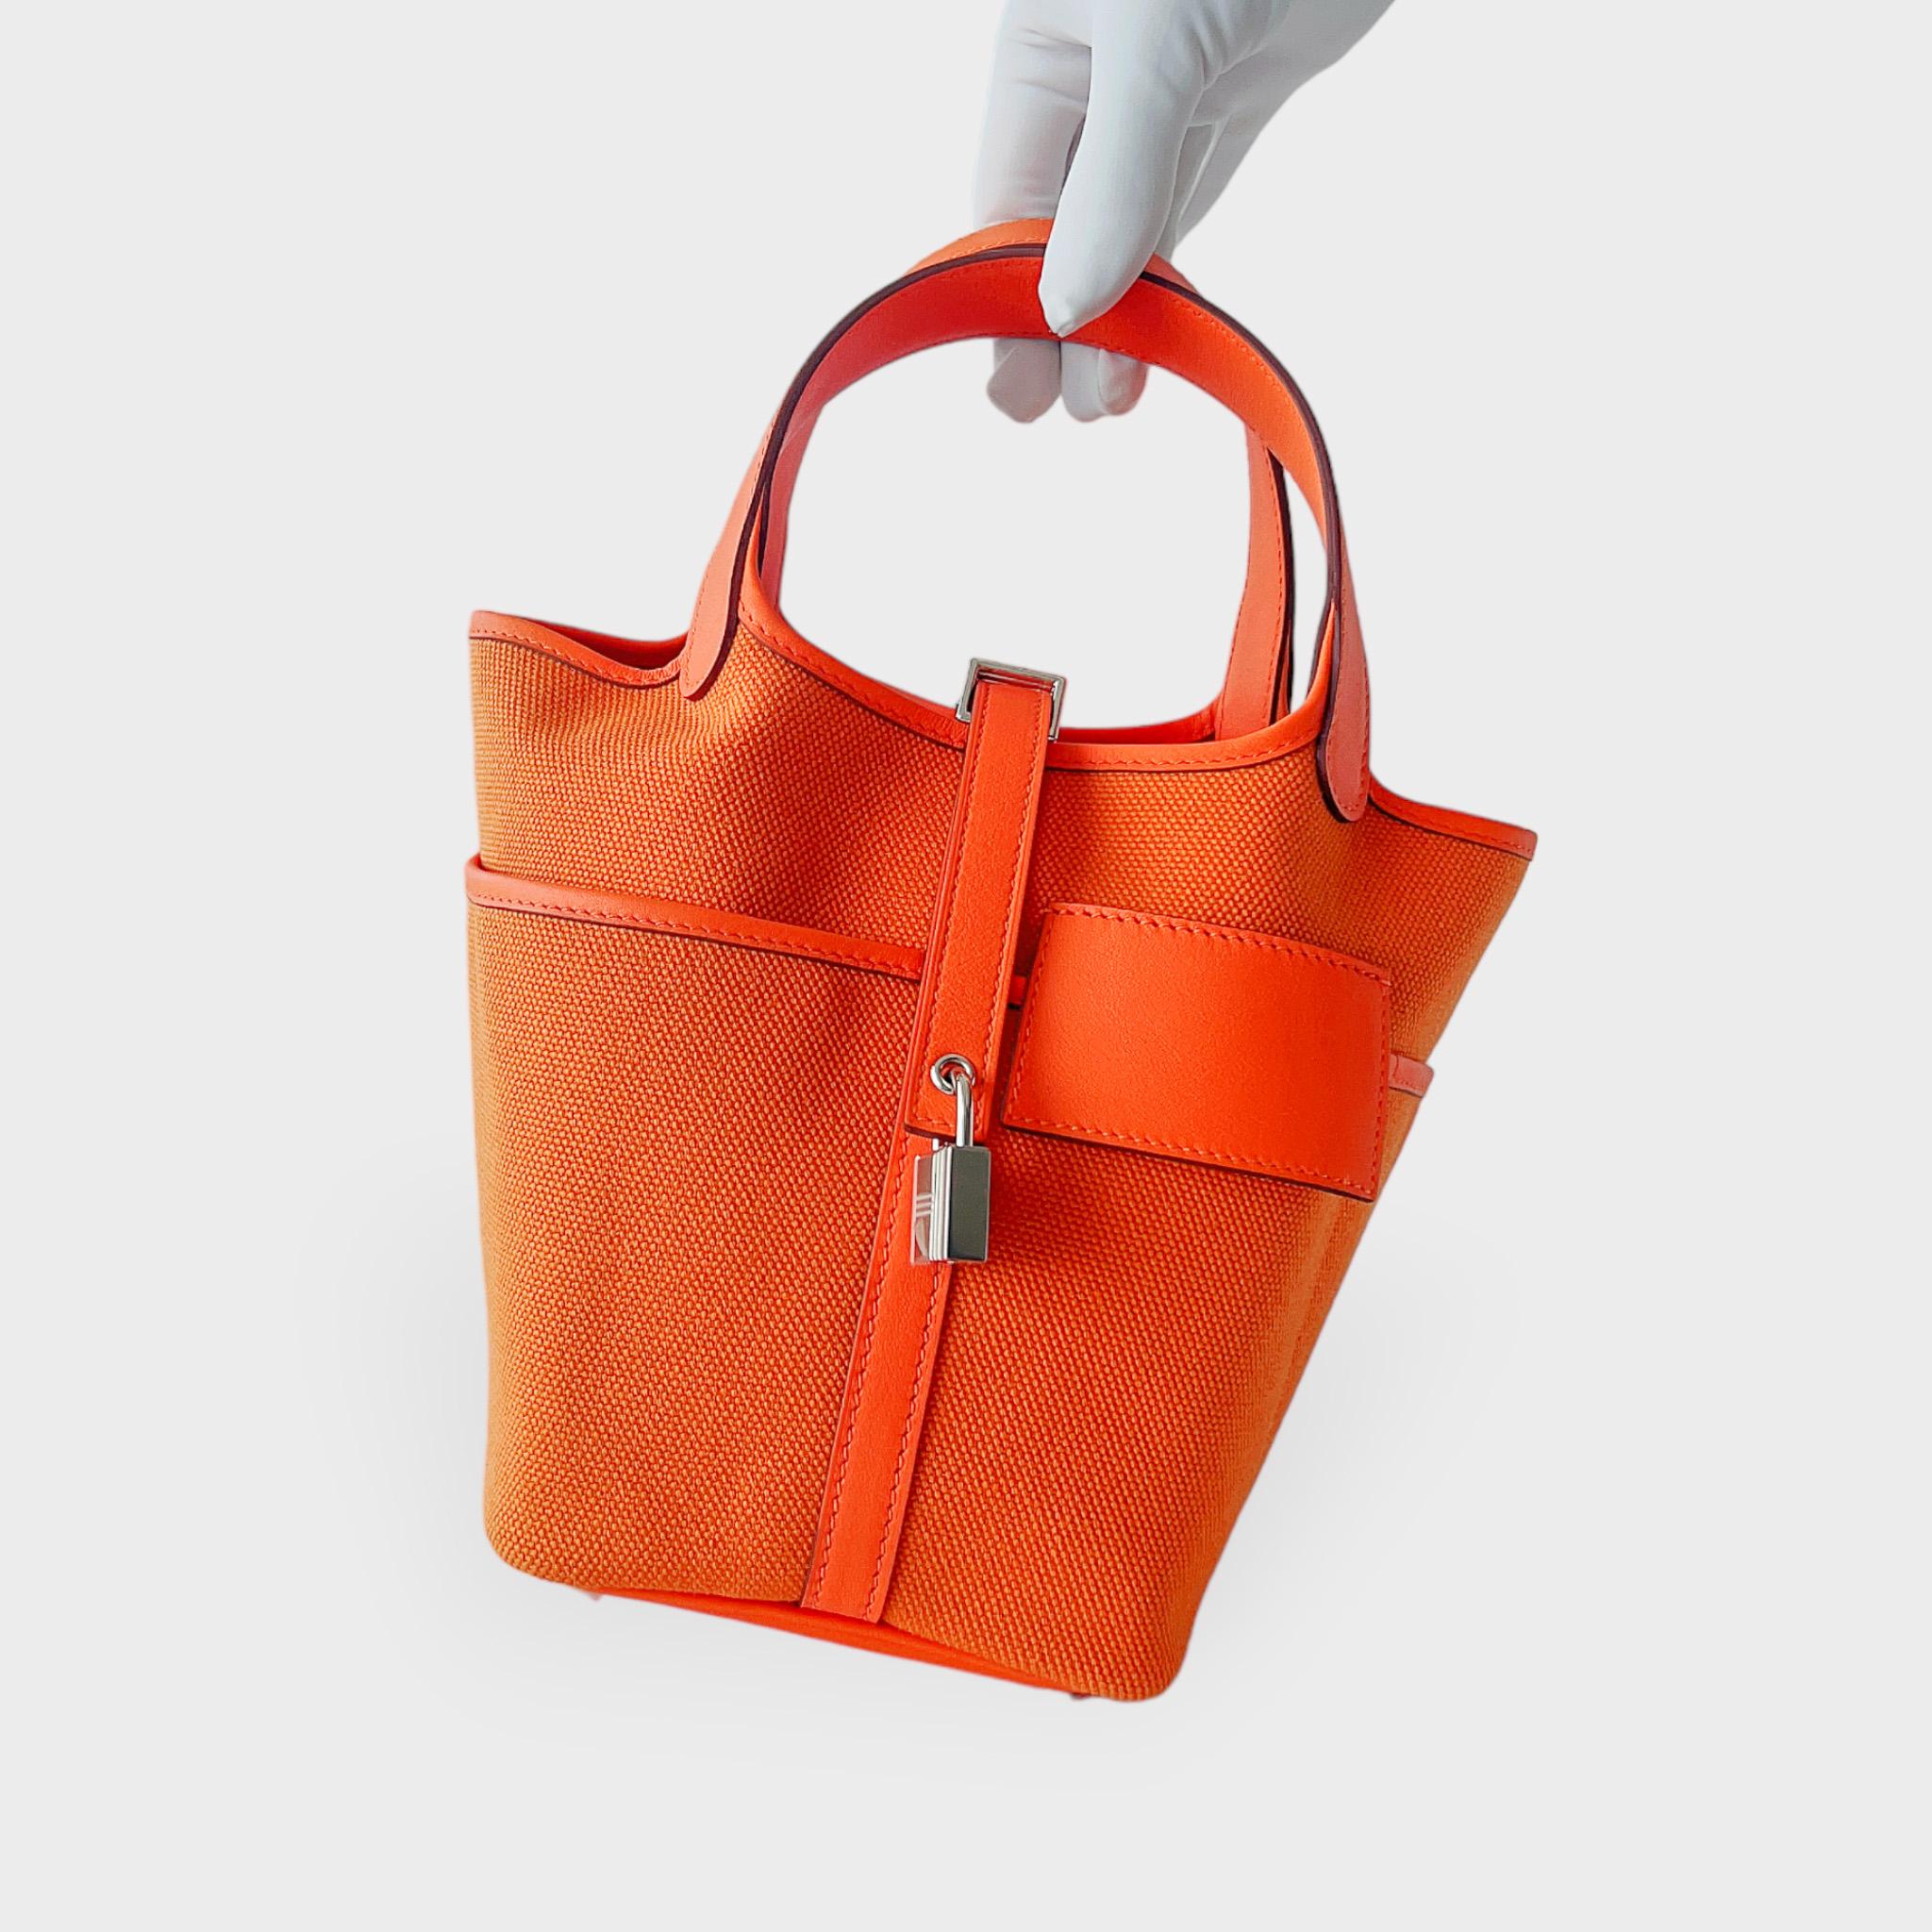 Shop this Hermes Cargo Picotin Lock Bag 18 In Orange With Palladium Plated Hardware which comes in the smaller Picotin size. This Picotin 18 comes in Orange Canvas detailing which is complimented to perfection with Palladium Plated Hardware. This